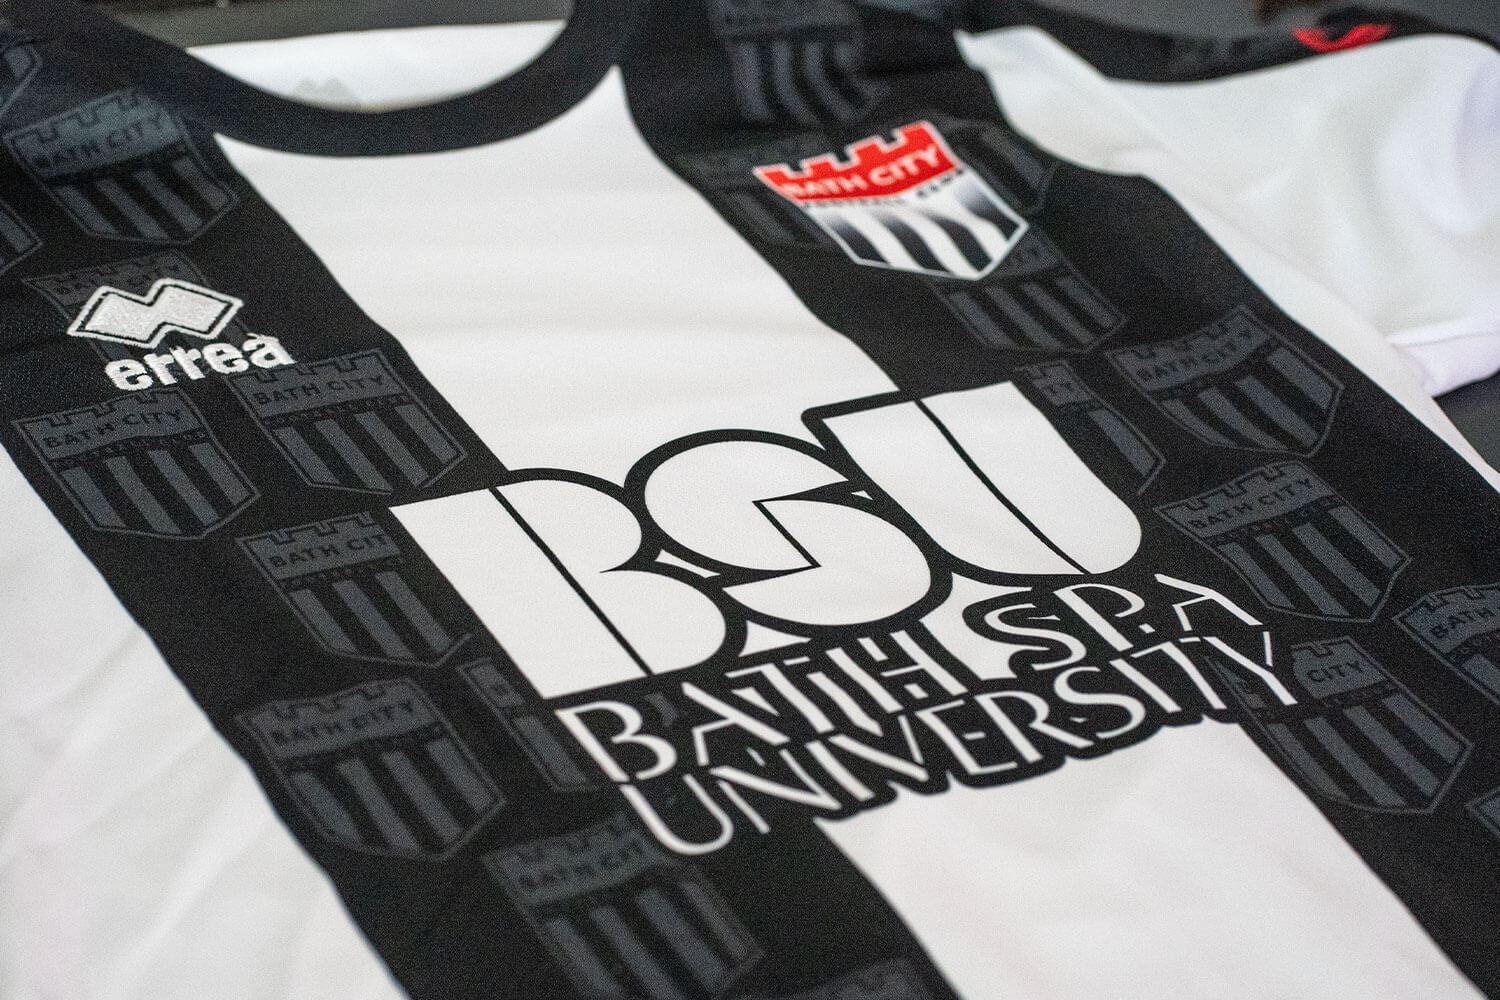 A close up picture of the new Bath City shirt, black and white striped, with the new BSU logo proudly displayed on the front